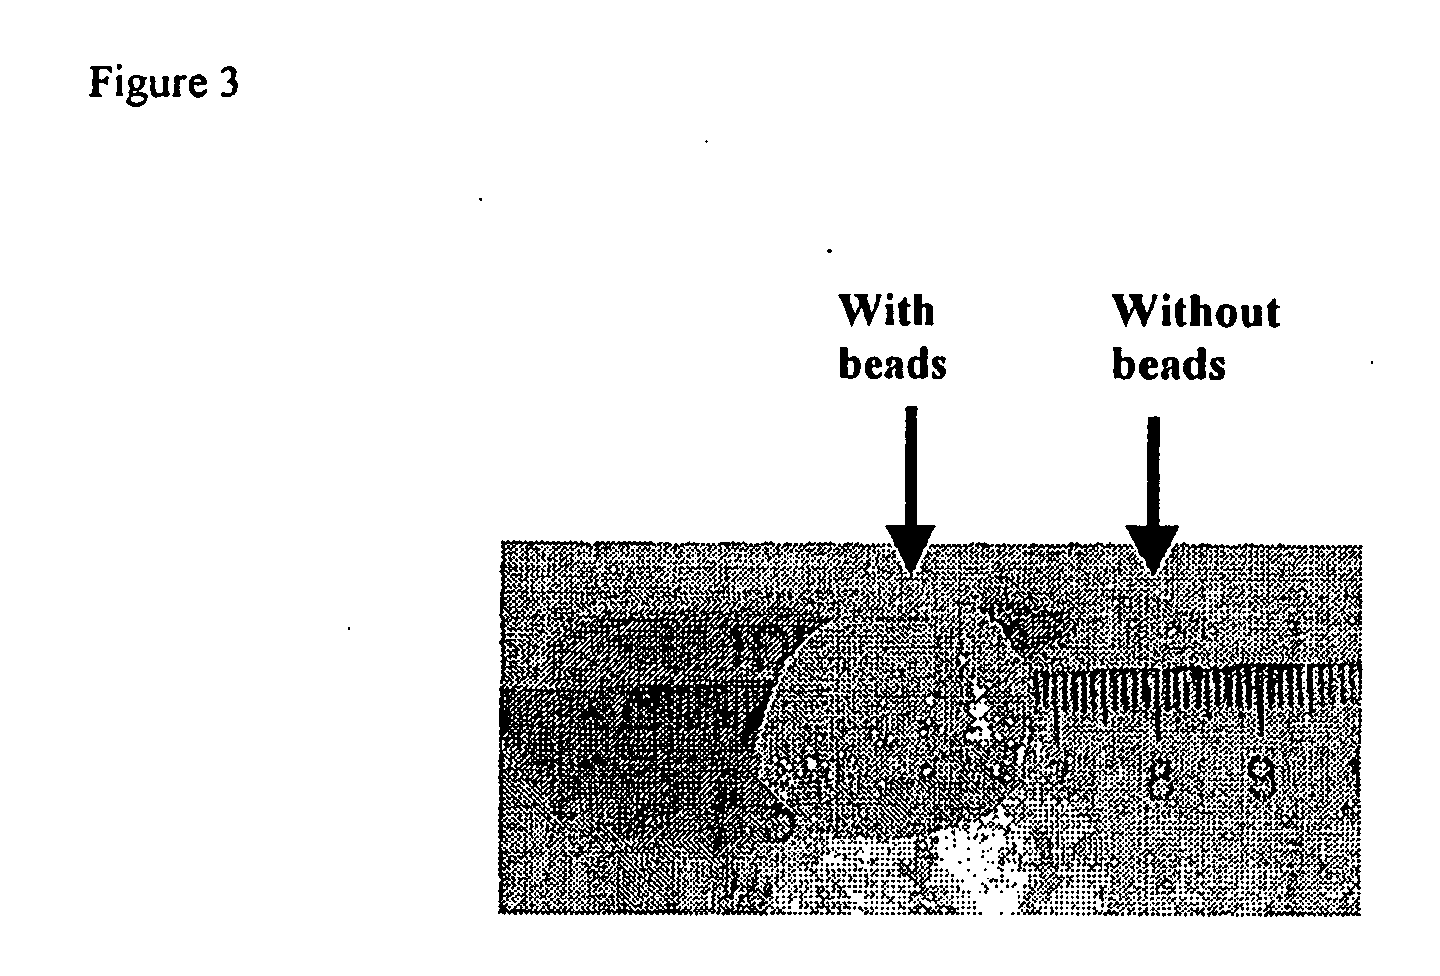 Methods and devices for tissue repair